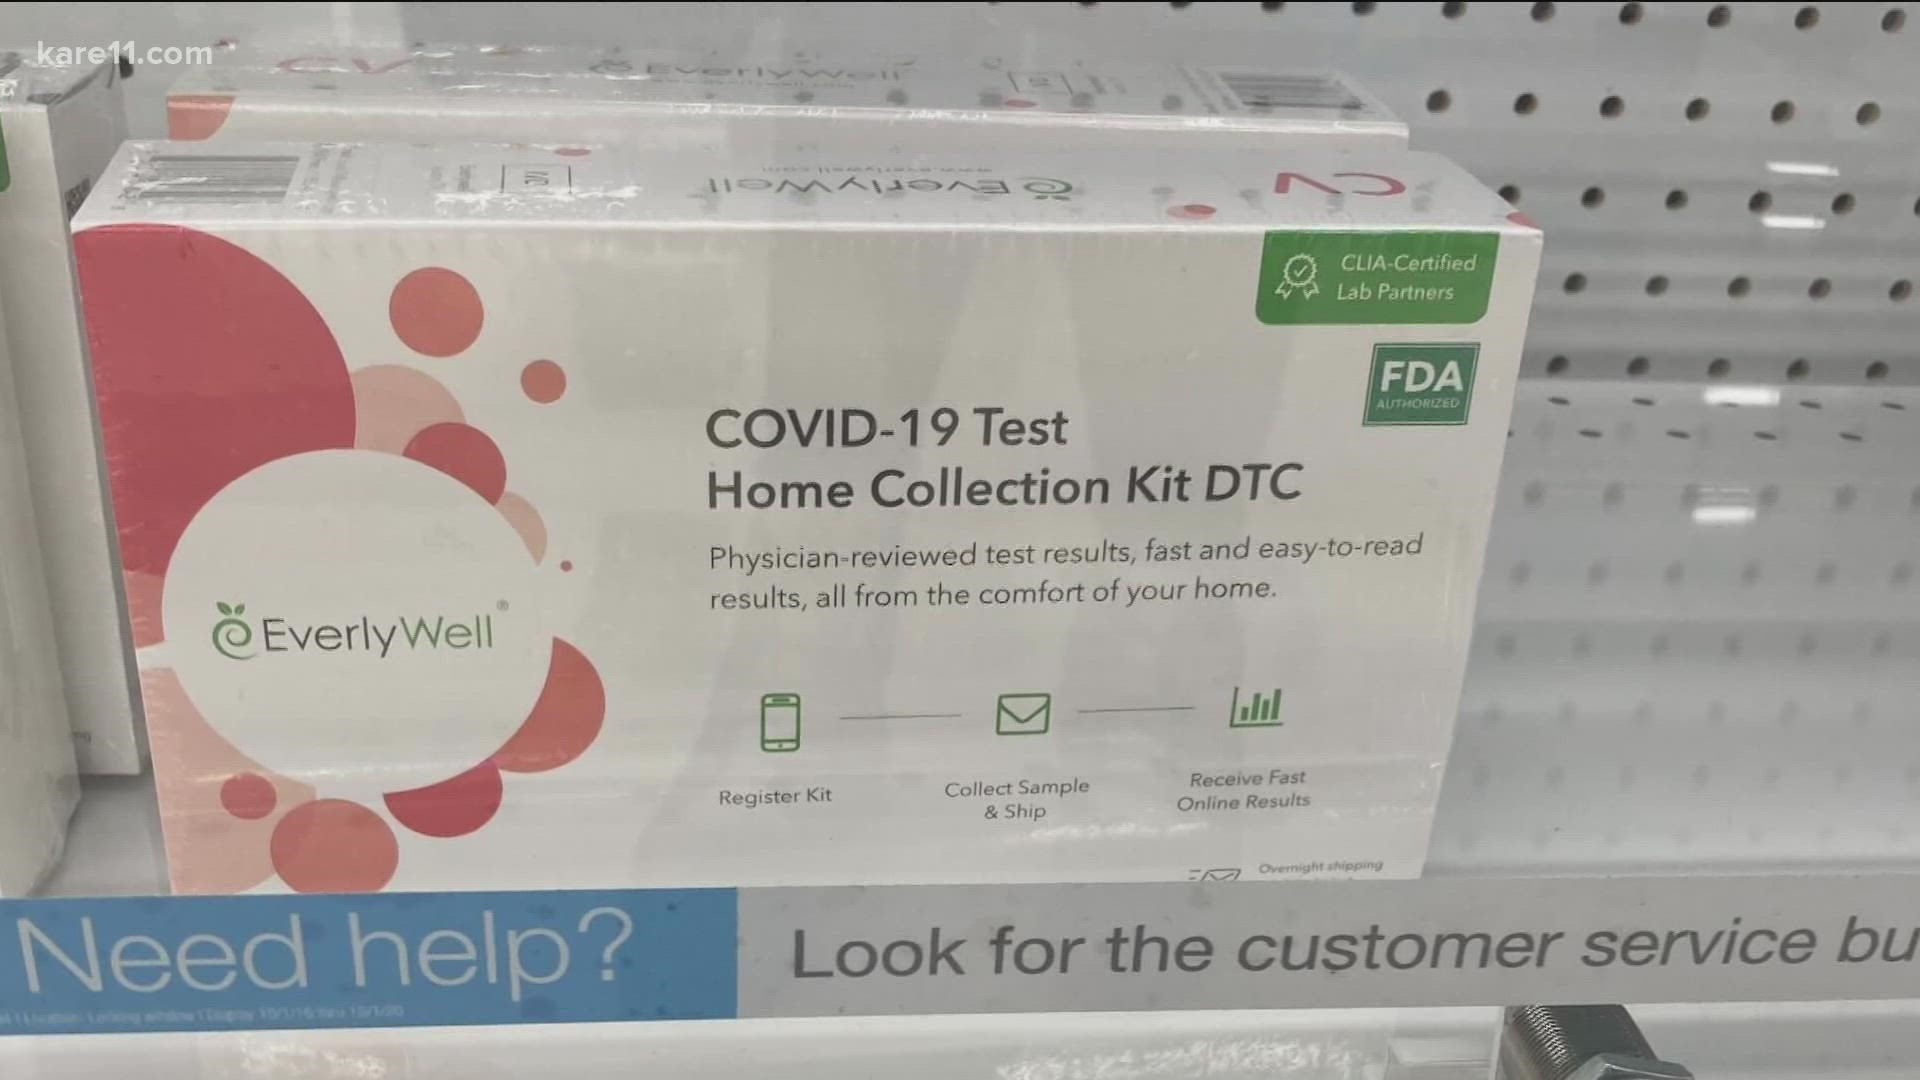 Online and in stores, prices for a two-pack of tests to do at home can range from $23.99 to $124.99.